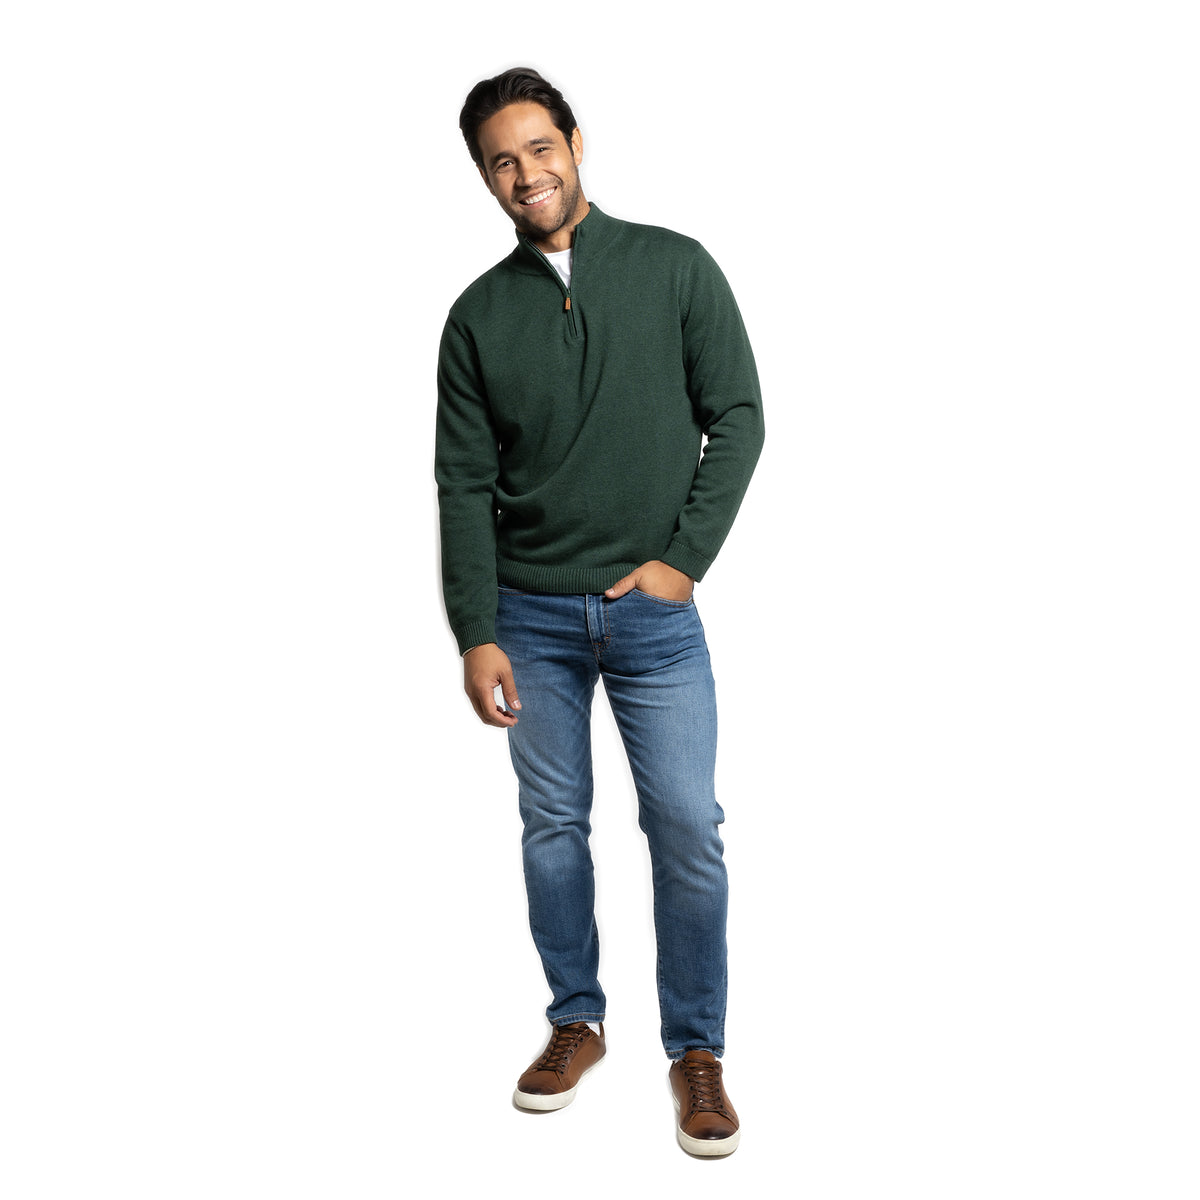 Cotton Quarter Zip Sweaters, Forest Green | Peter Manning NYC